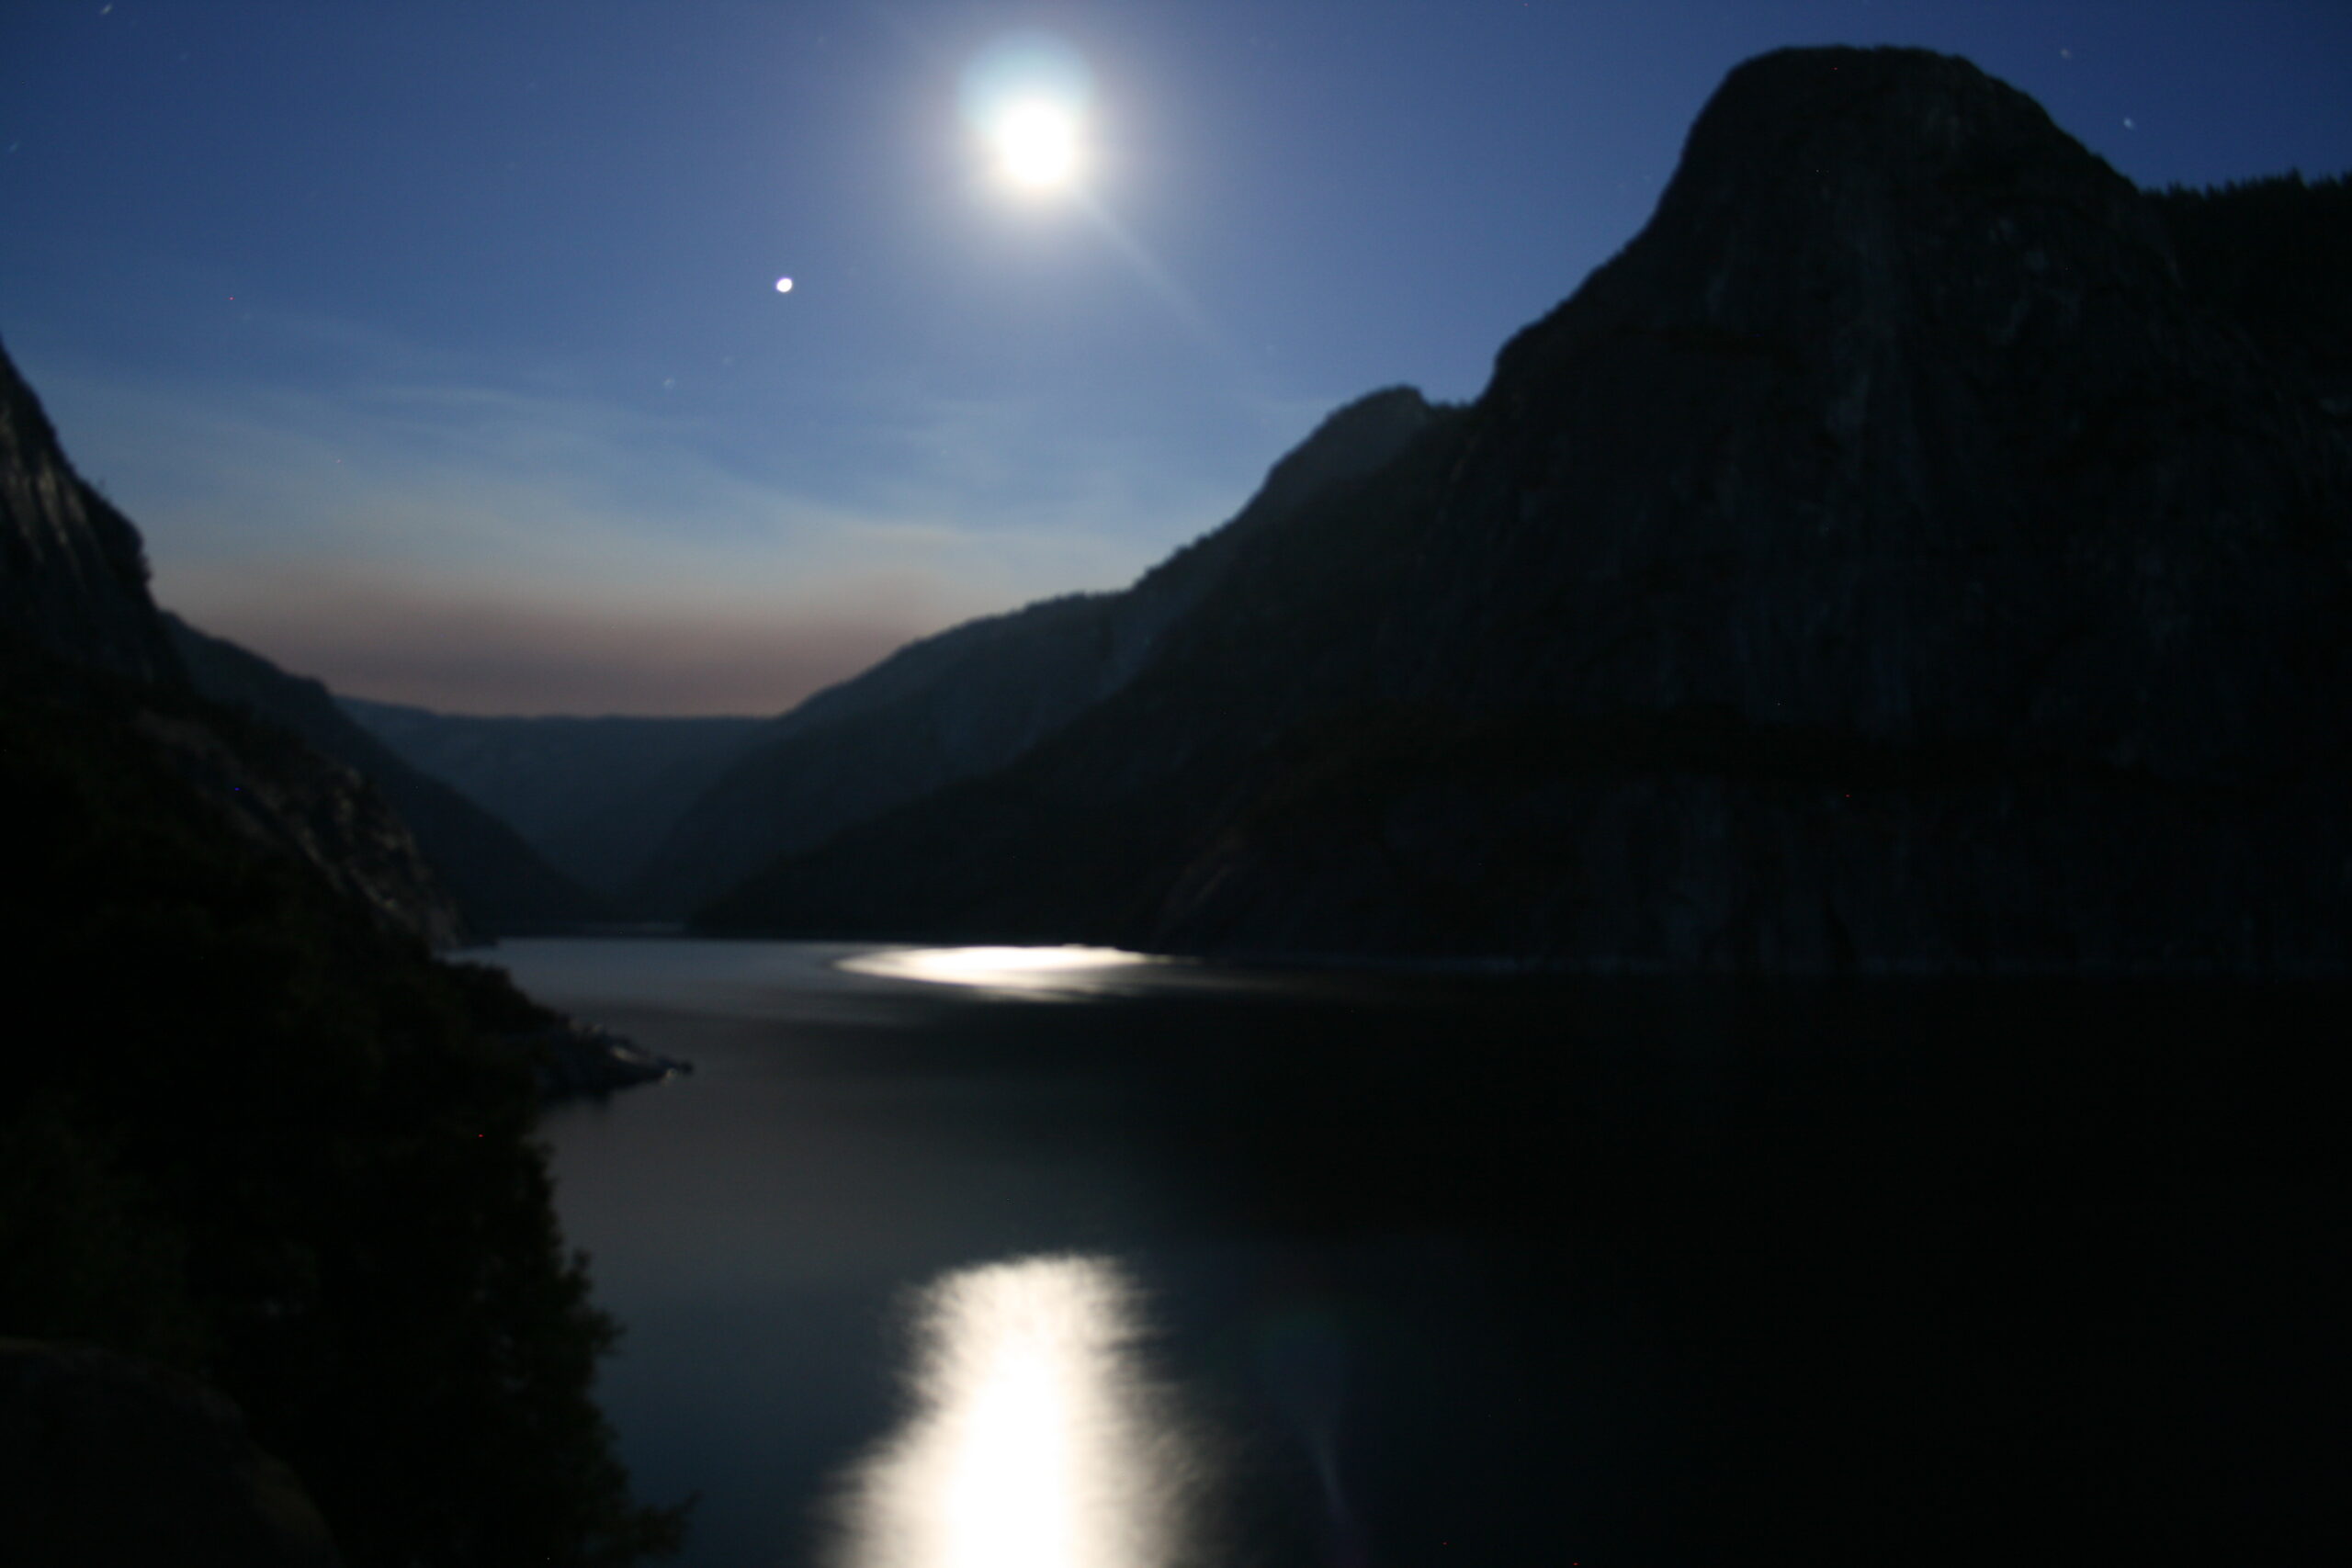 Hetch Hetchy reservoir view at sunset with moon reflection